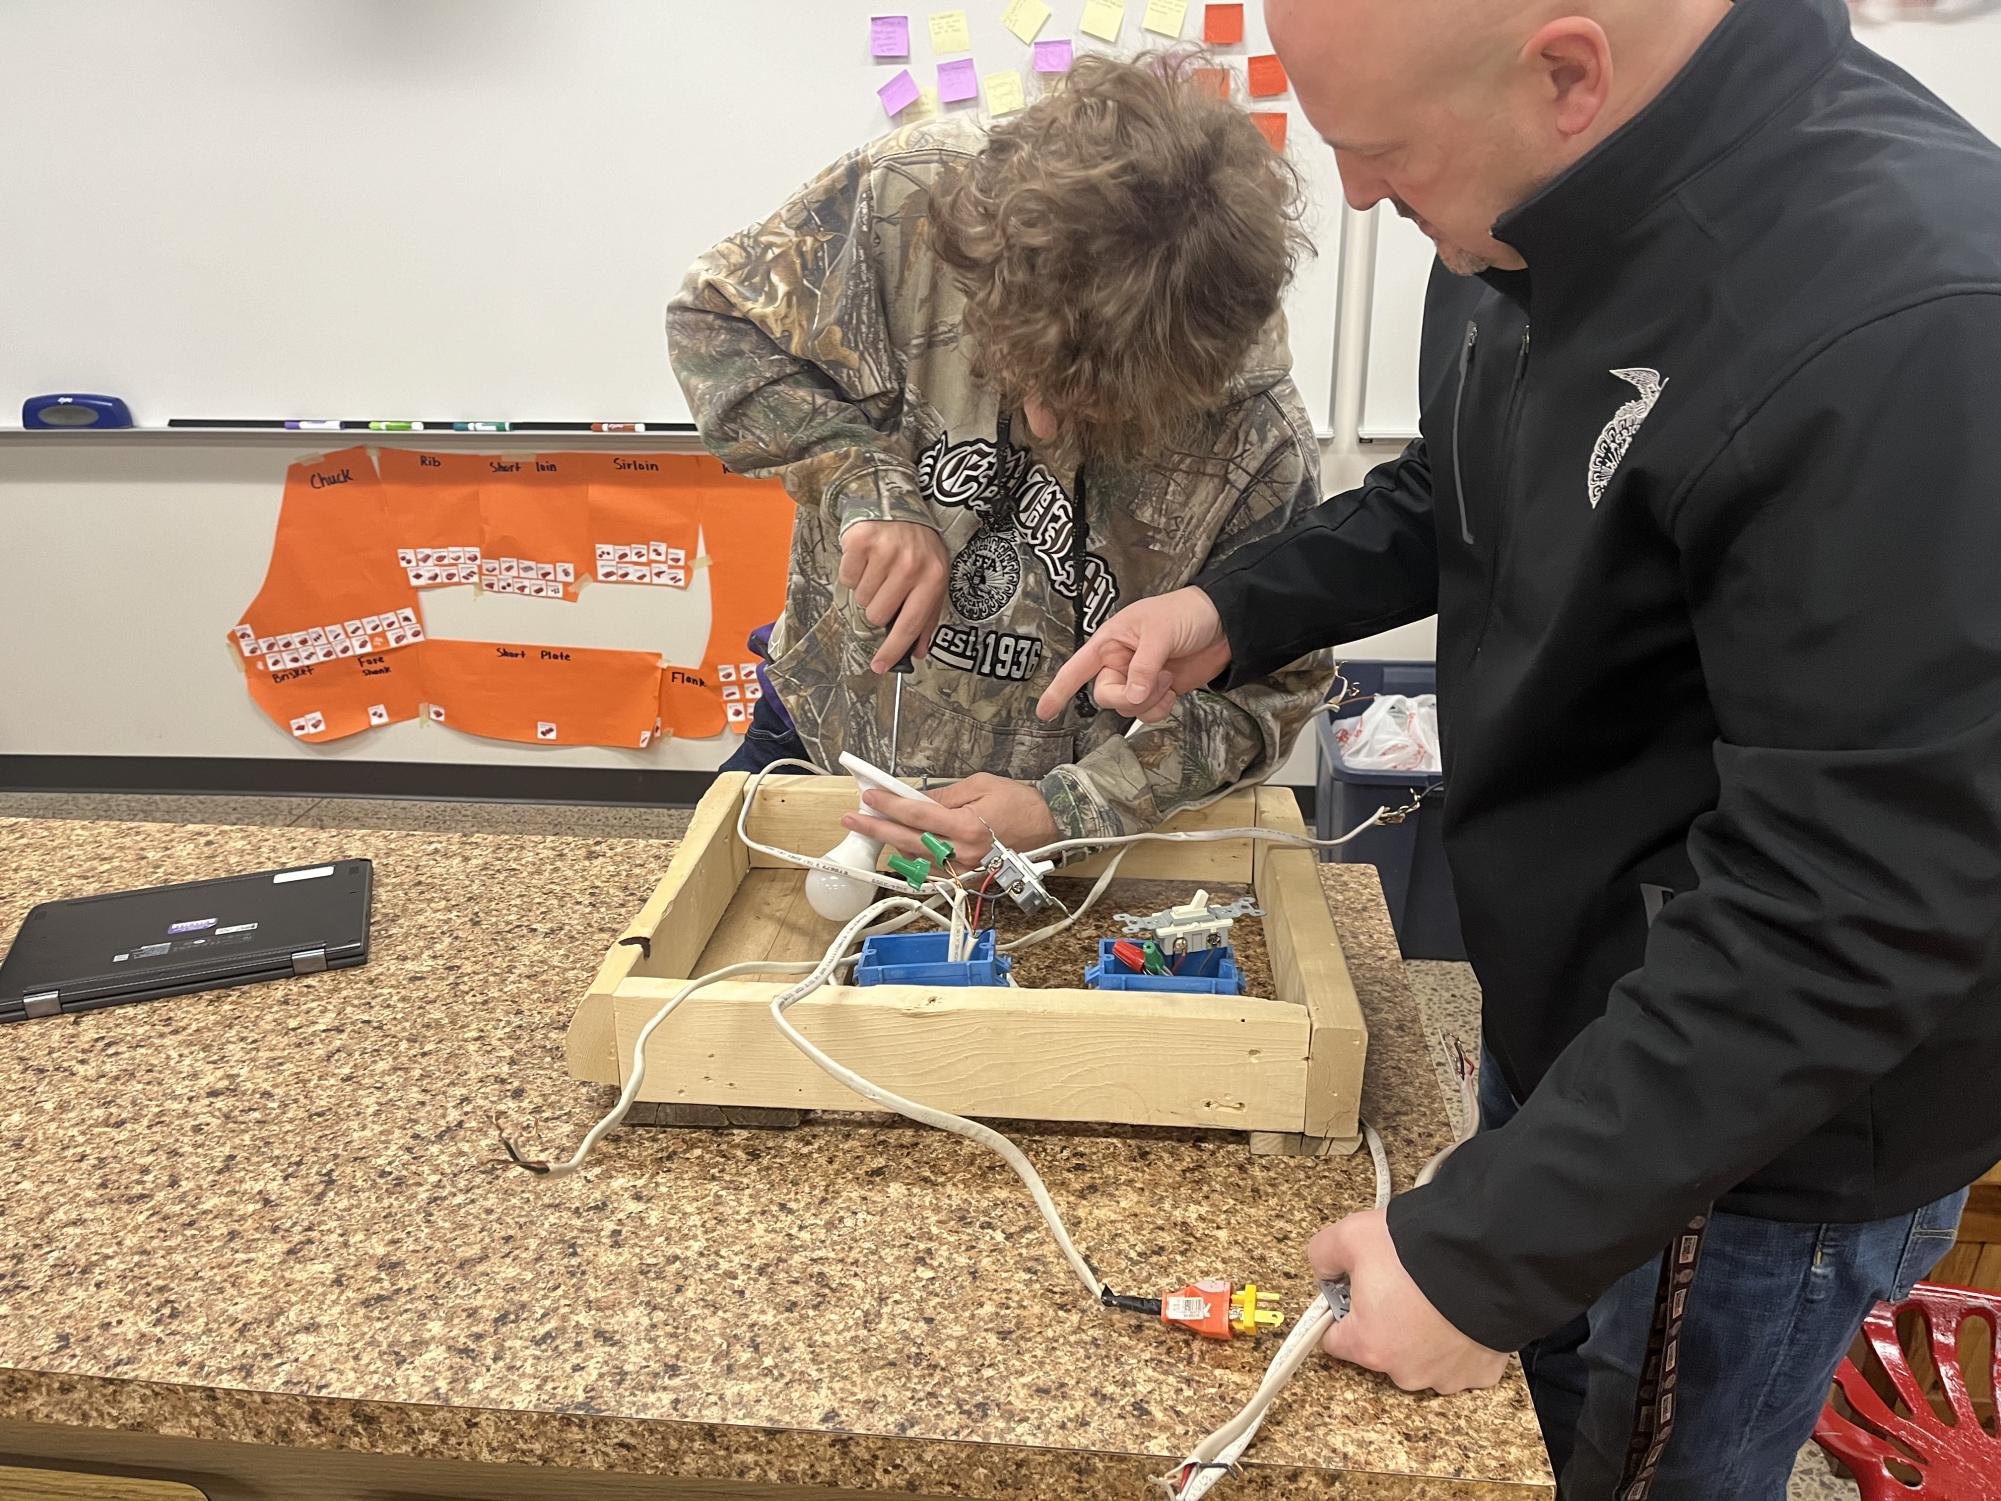 Mark Beranek learns how to wire up a two way switch while Mr. Nelson coaches him through the steps. Its actually pretty easy once you do it once or twice, Mark said.